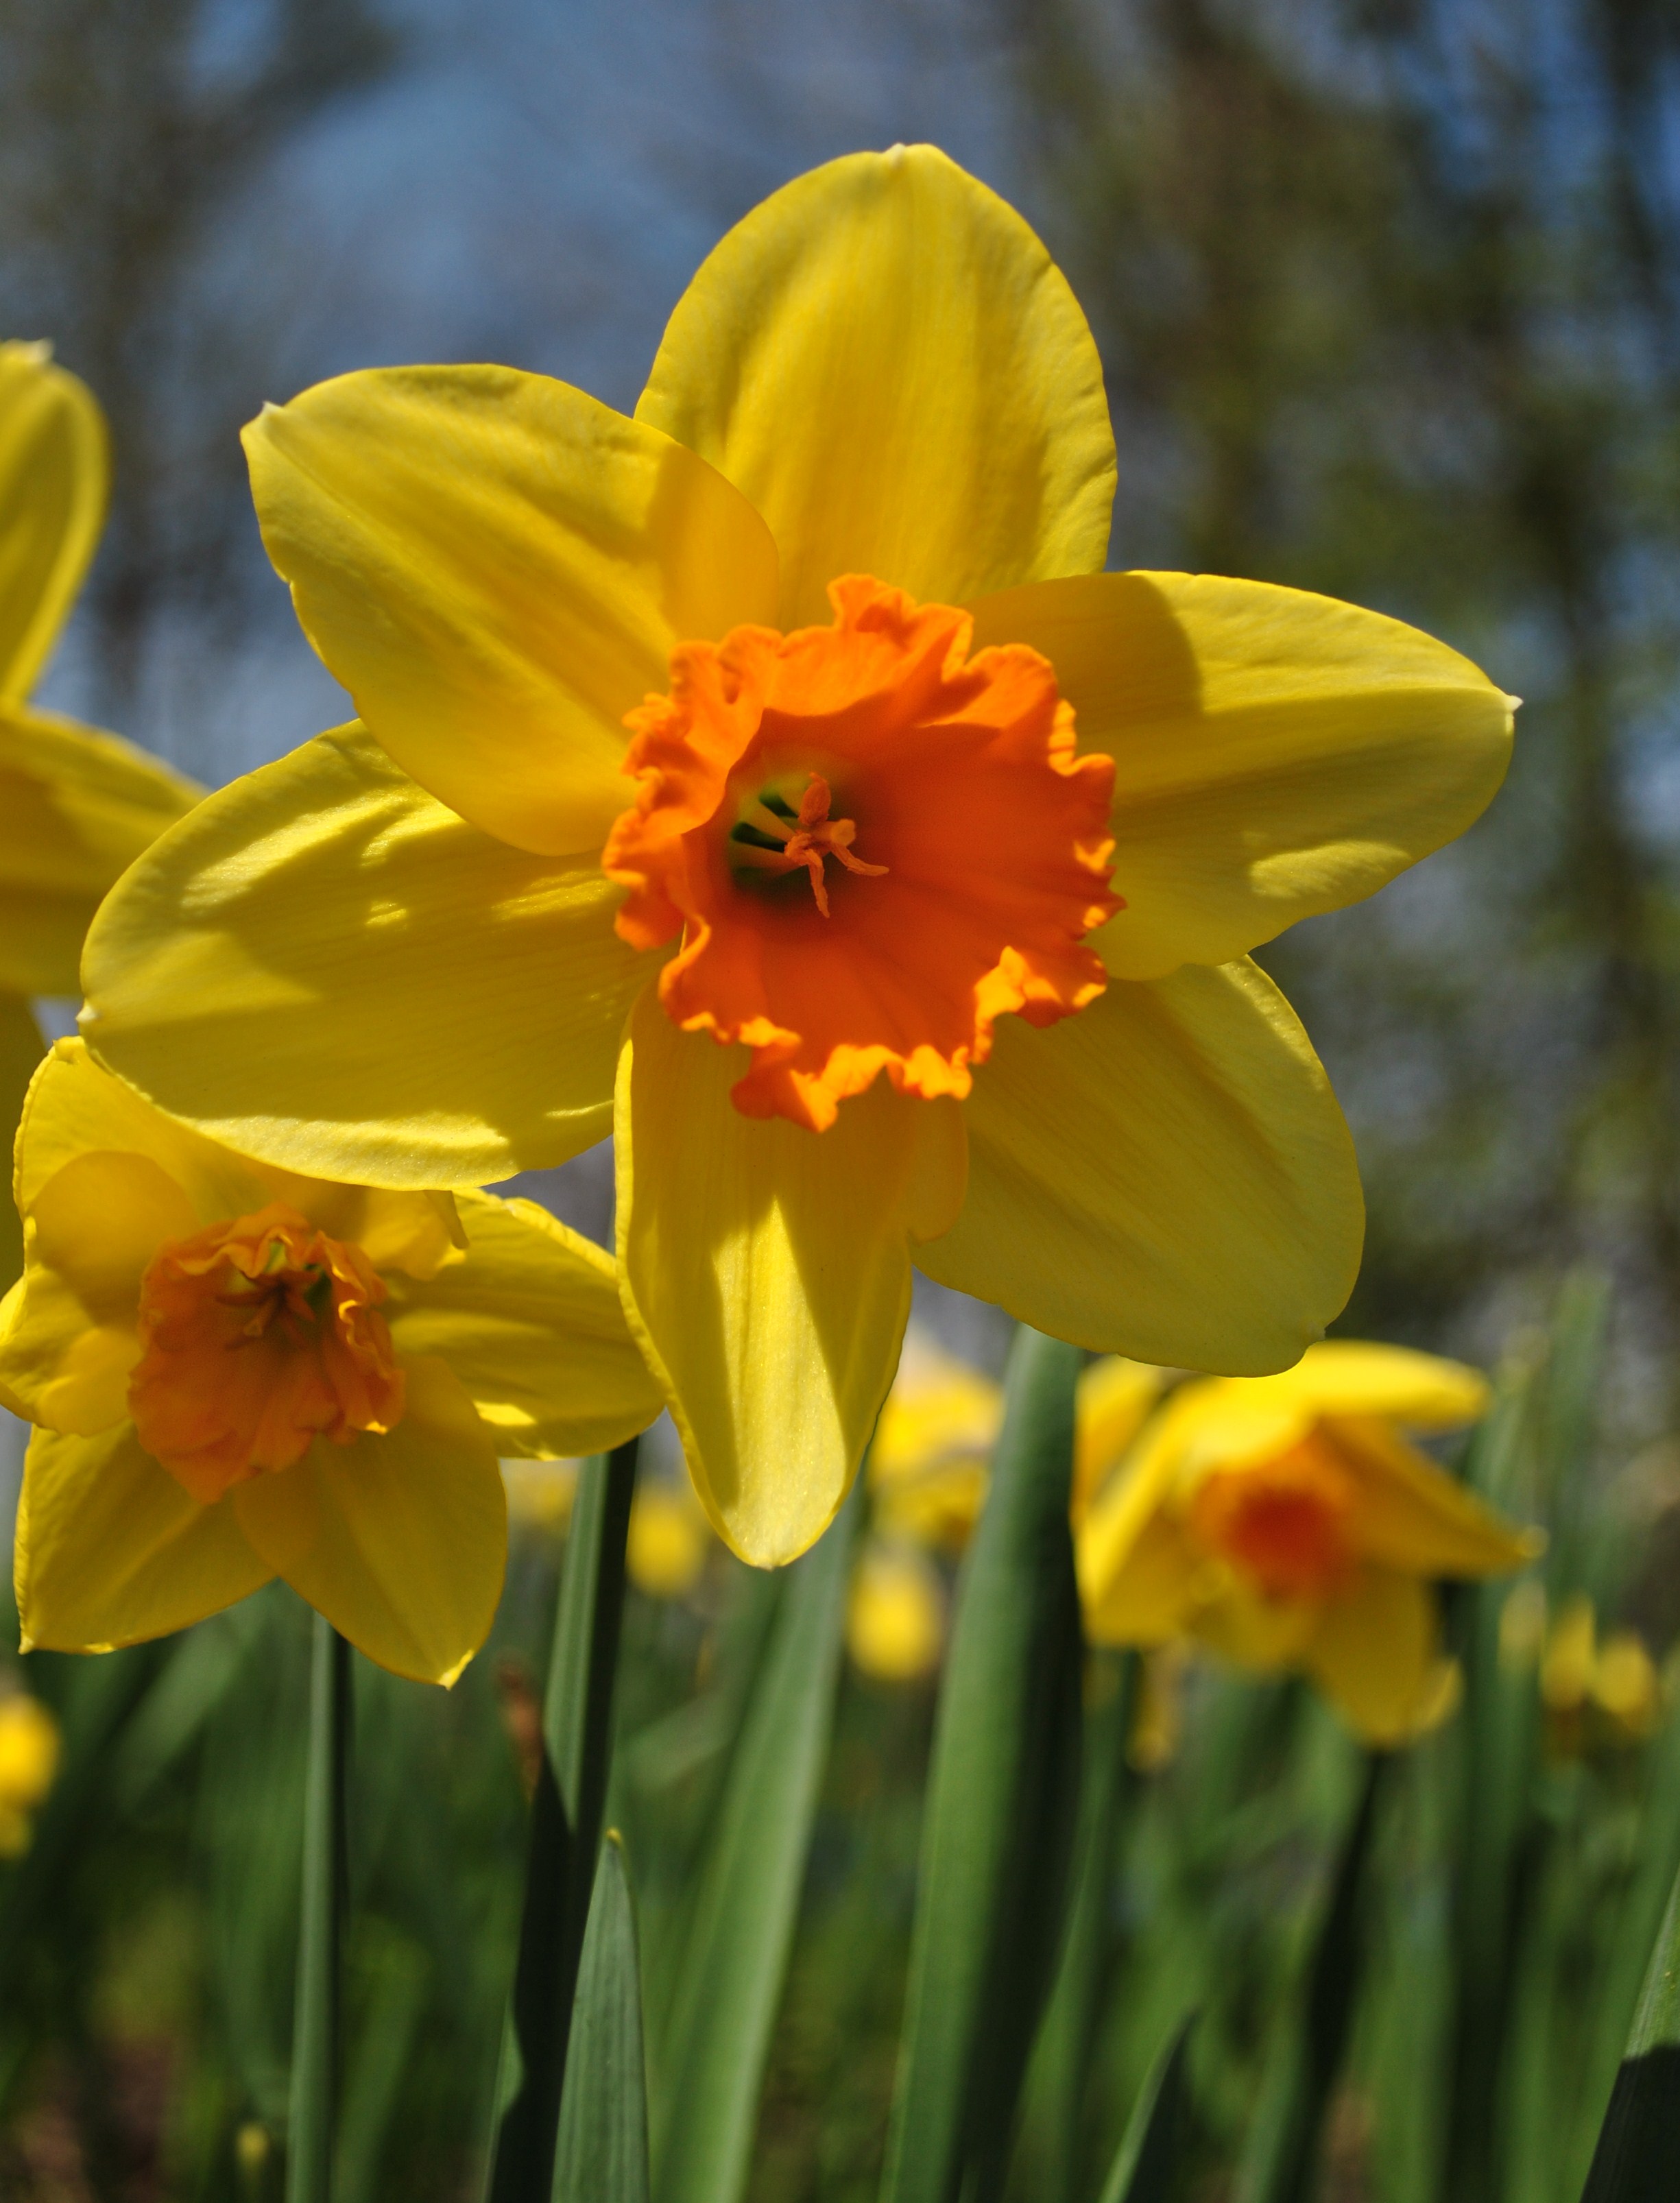  
Narcissus 'Ambergate'; yellow, shiny flowers with orange, cup-like corona, orange stamens, and blue-green, slender stems
